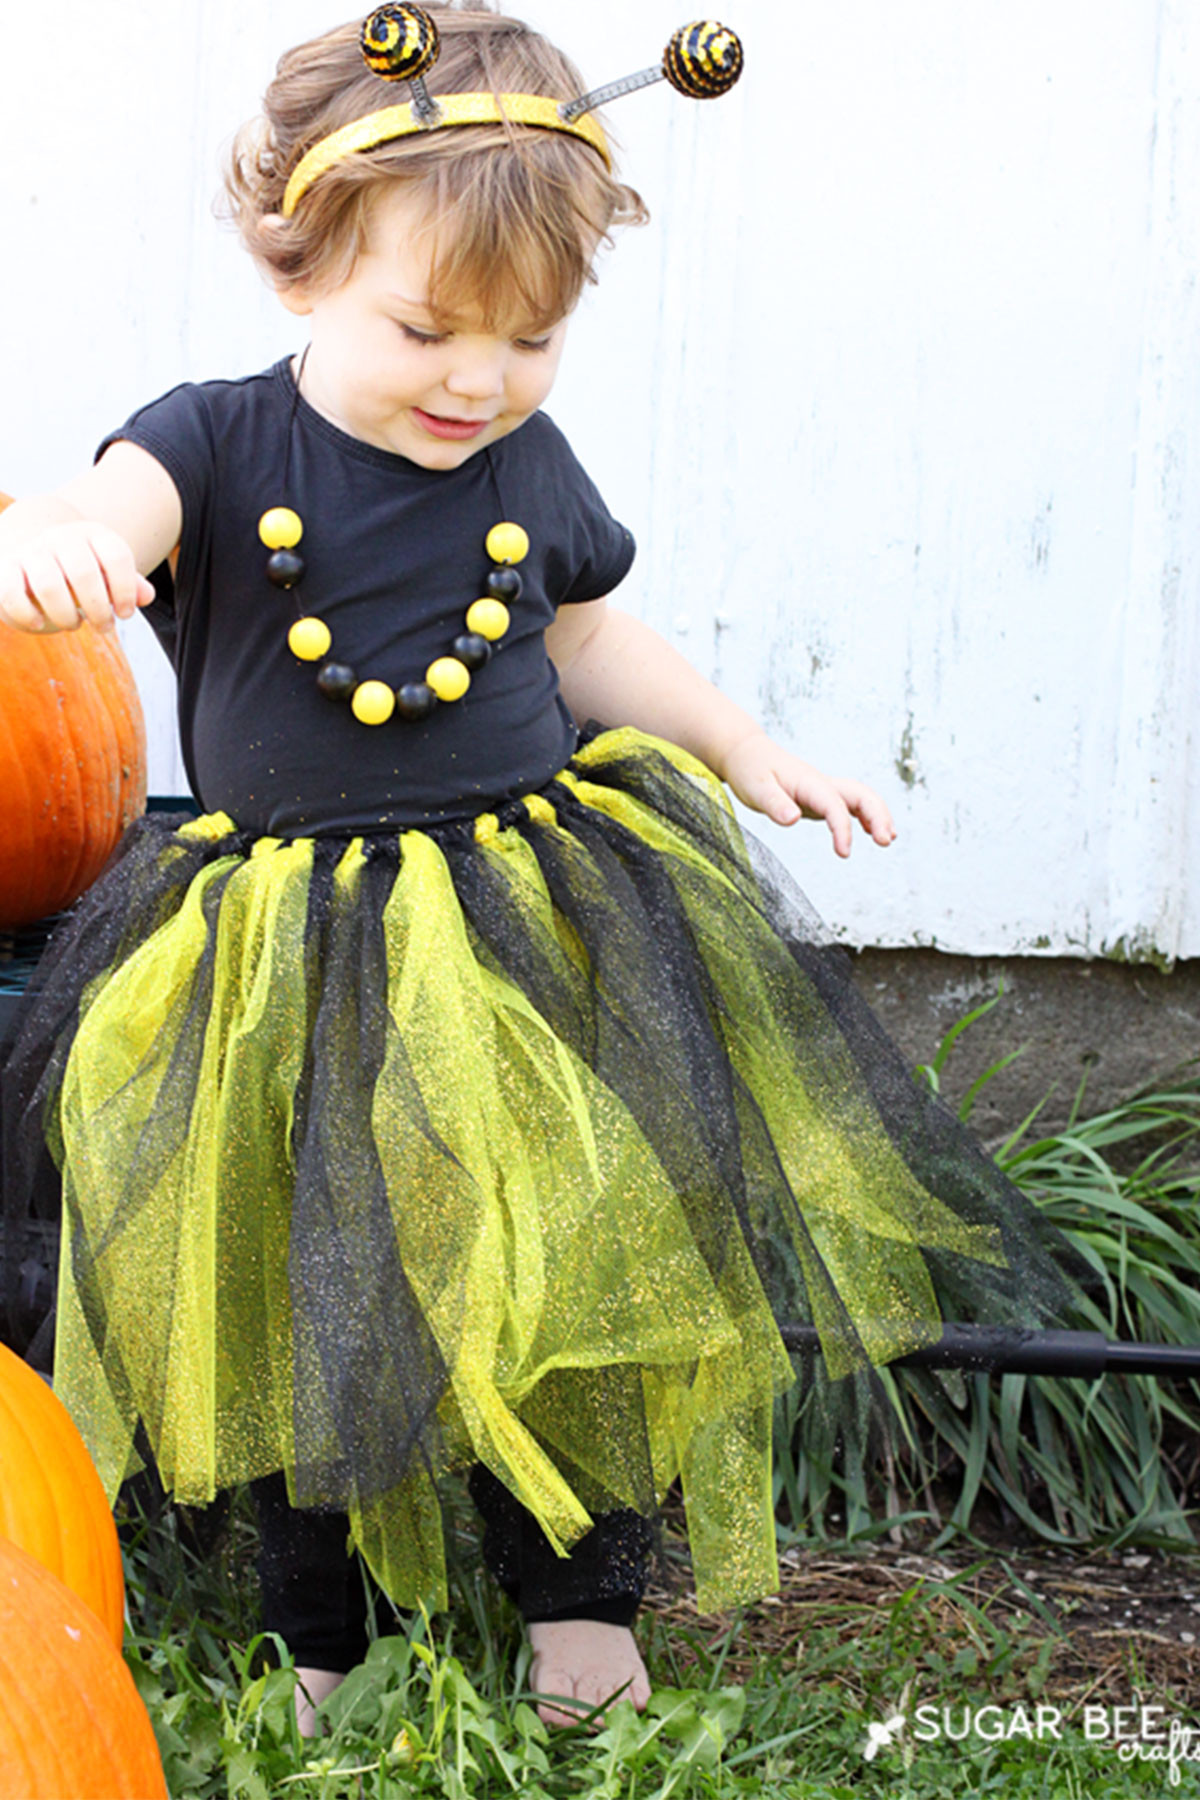 DIY Halloween Costume For Toddlers
 55 Homemade Halloween Costumes for Kids Easy DIY Ideas